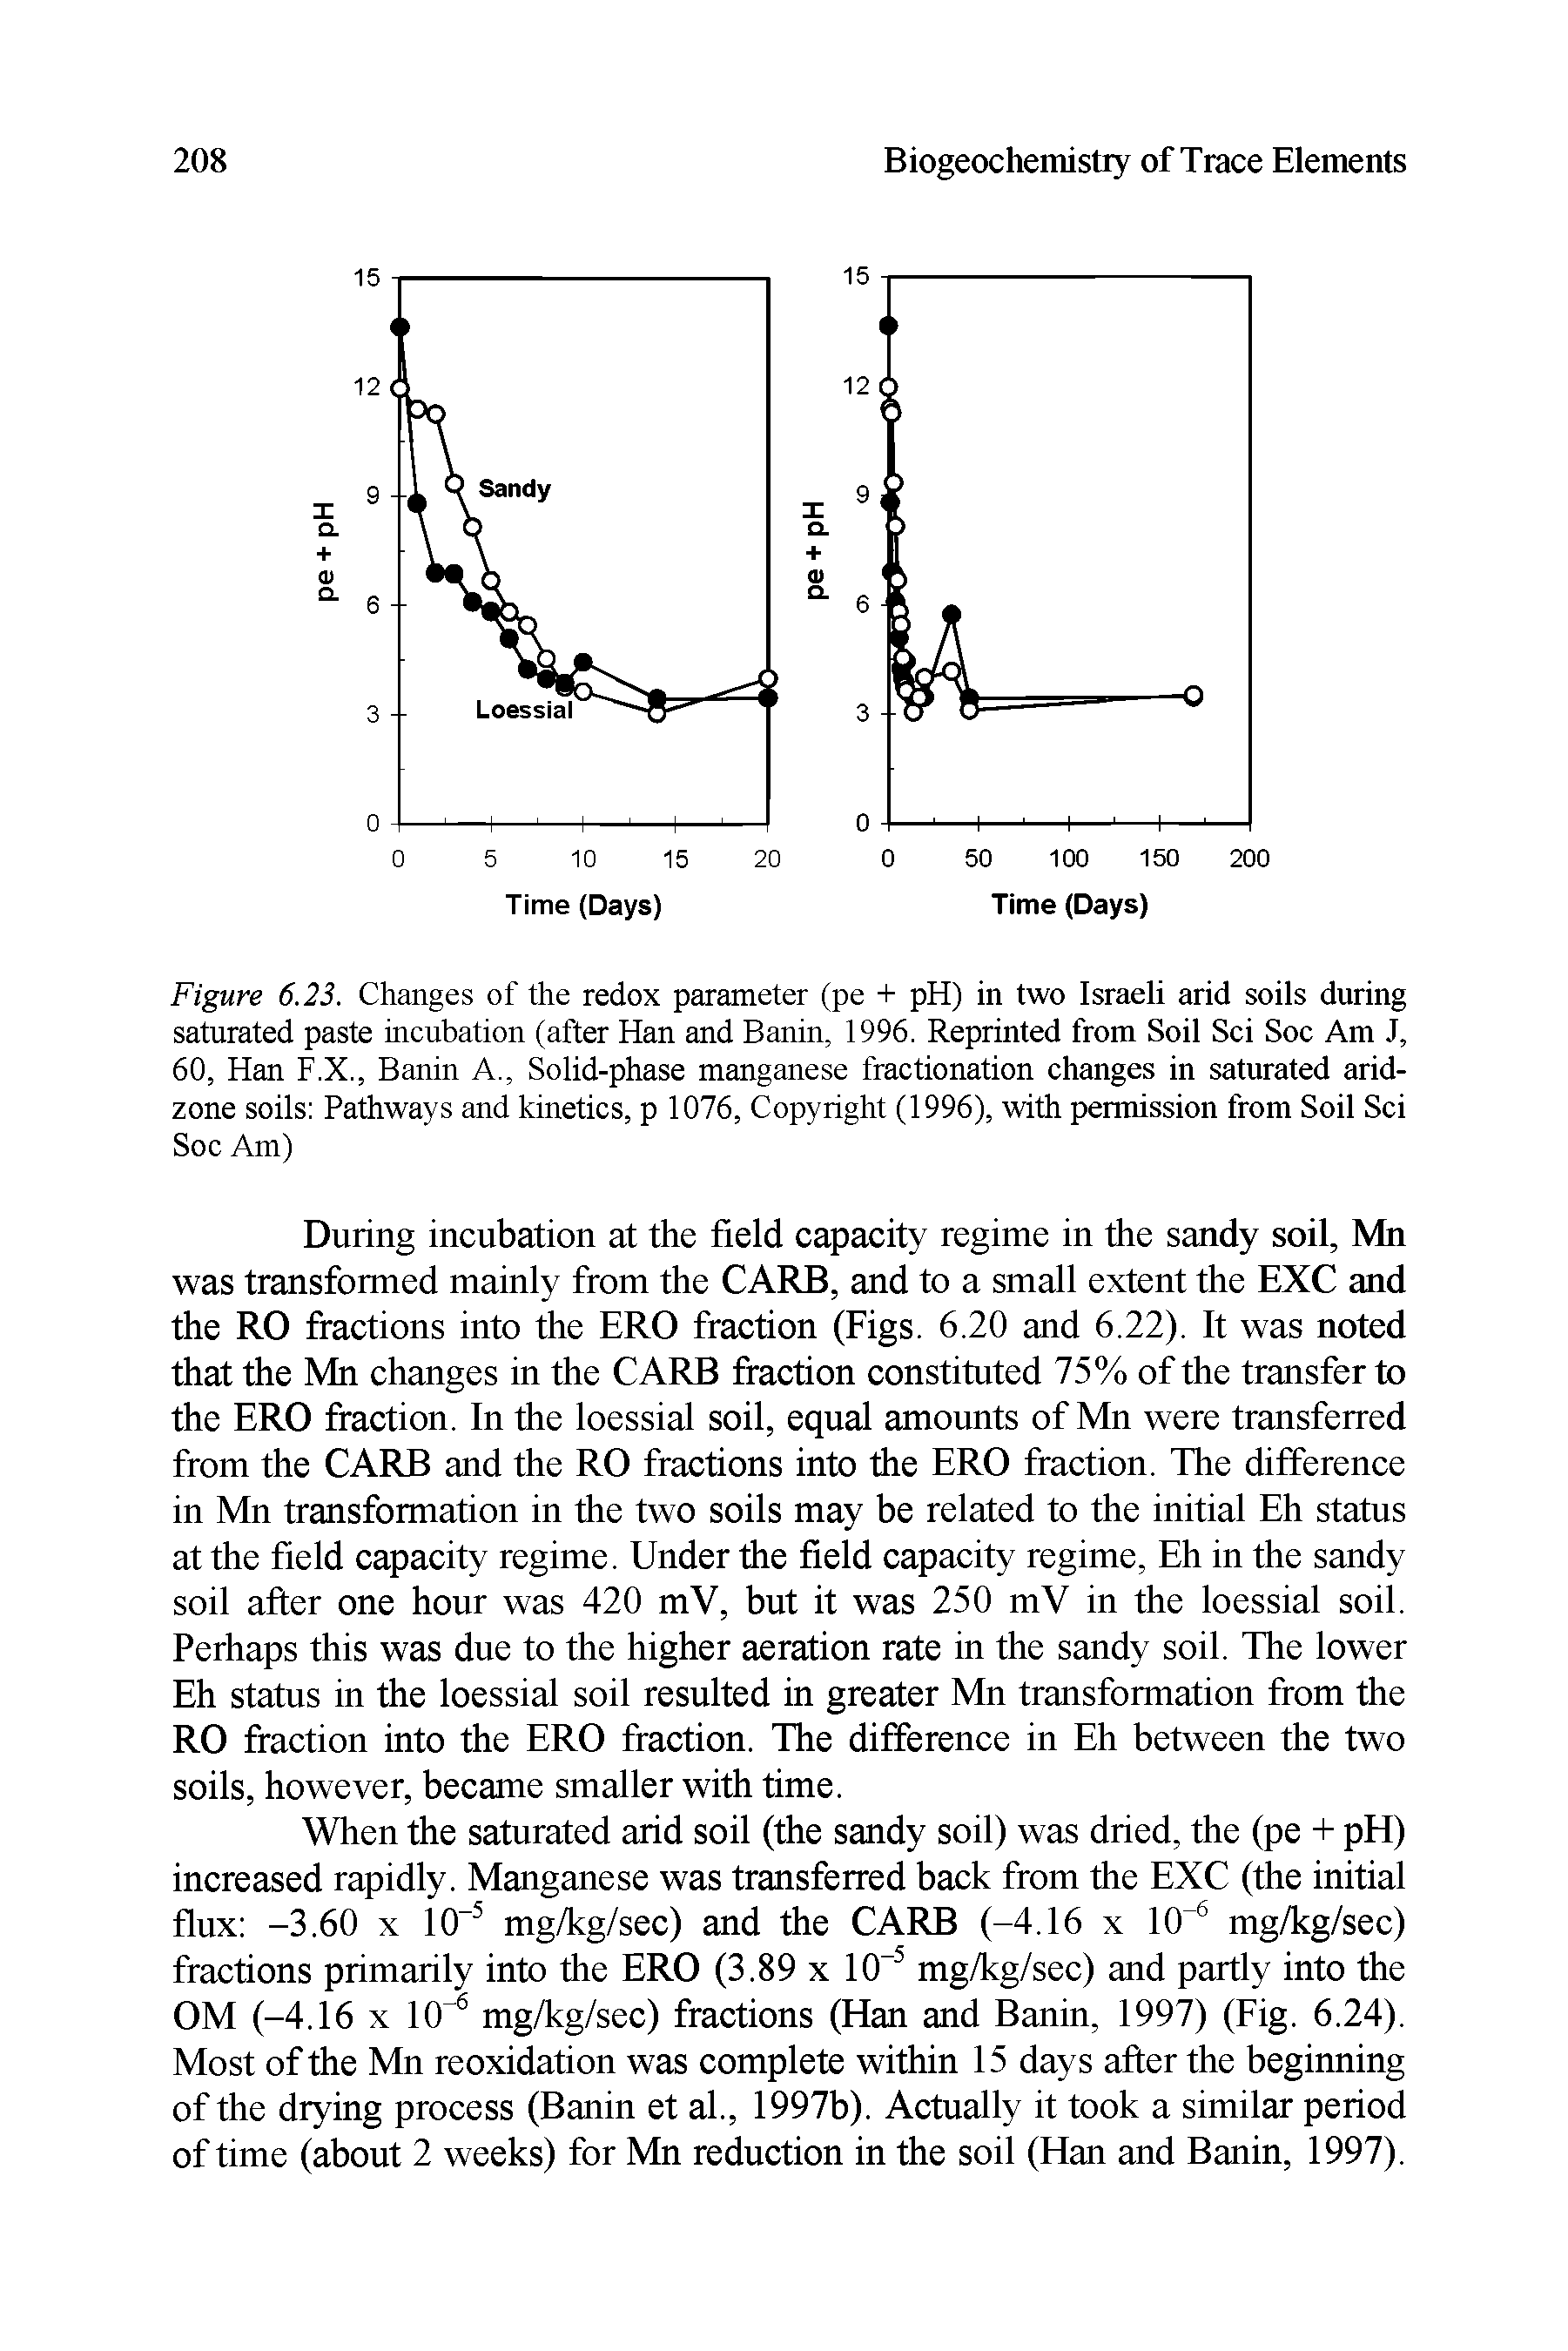 Figure 6.23. Changes of the redox parameter (pe + pH) in two Israeli arid soils during saturated paste incubation (after Han and Banin, 1996. Reprinted from Soil Sci Soc Am J, 60, Han F.X., Banin A., Solid-phase manganese fractionation changes in saturated arid-zone soils Pathways and kinetics, p 1076, Copyright (1996), with permission from Soil Sci Soc Am)...